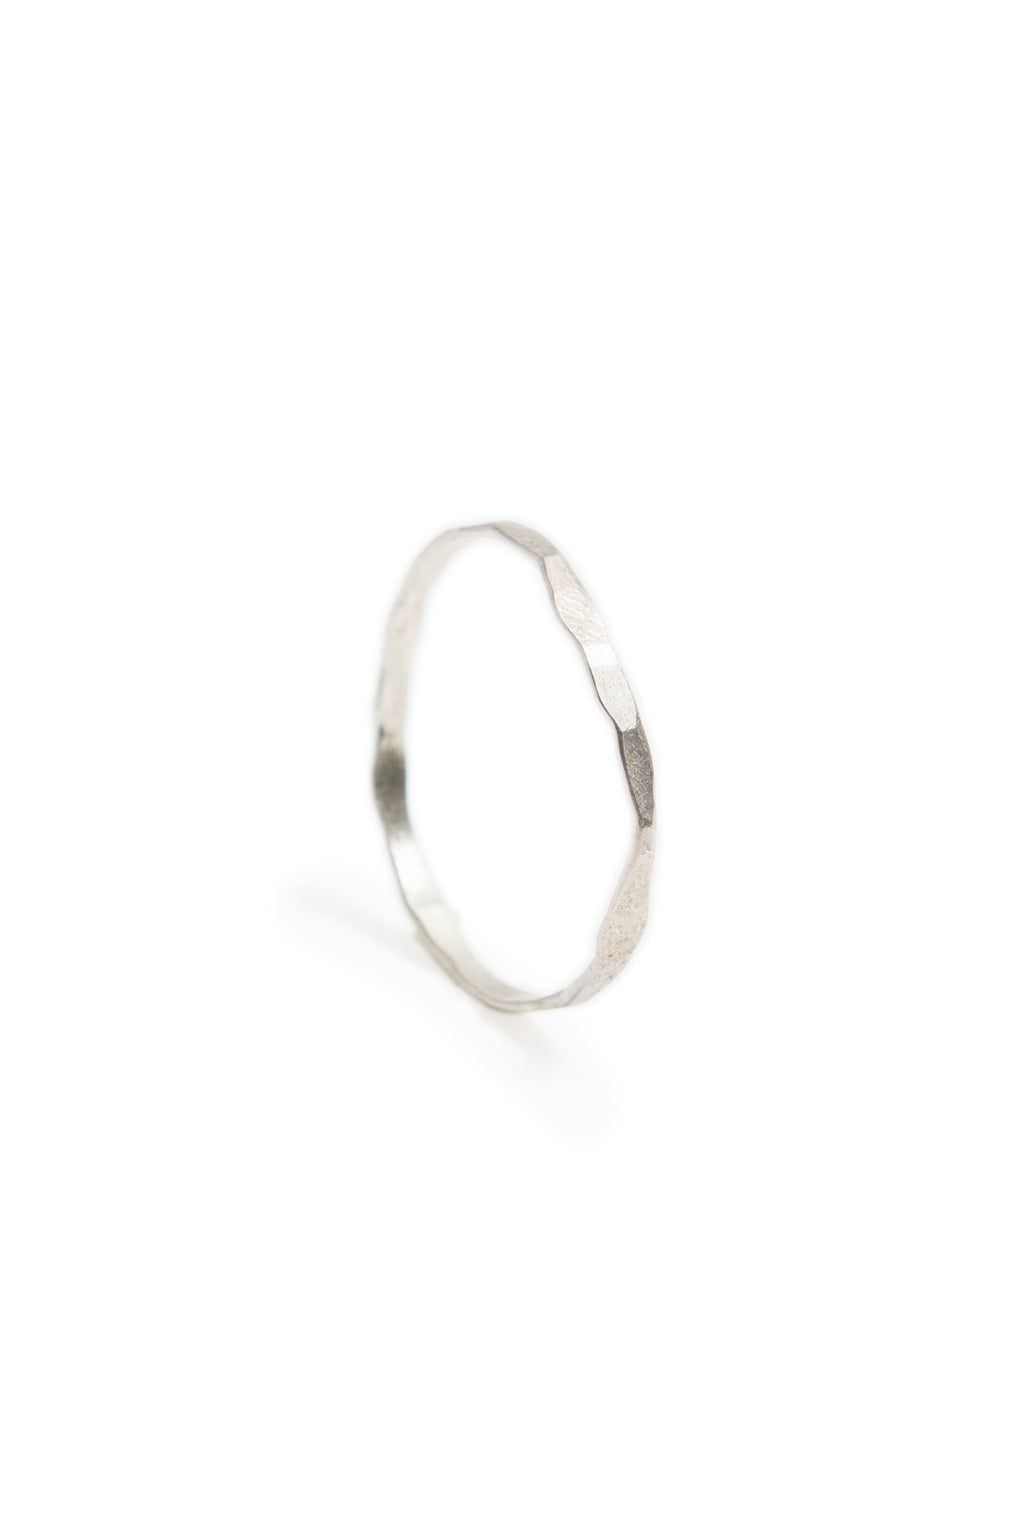 Tiny Sterling Silver Hammered Stacking Ring